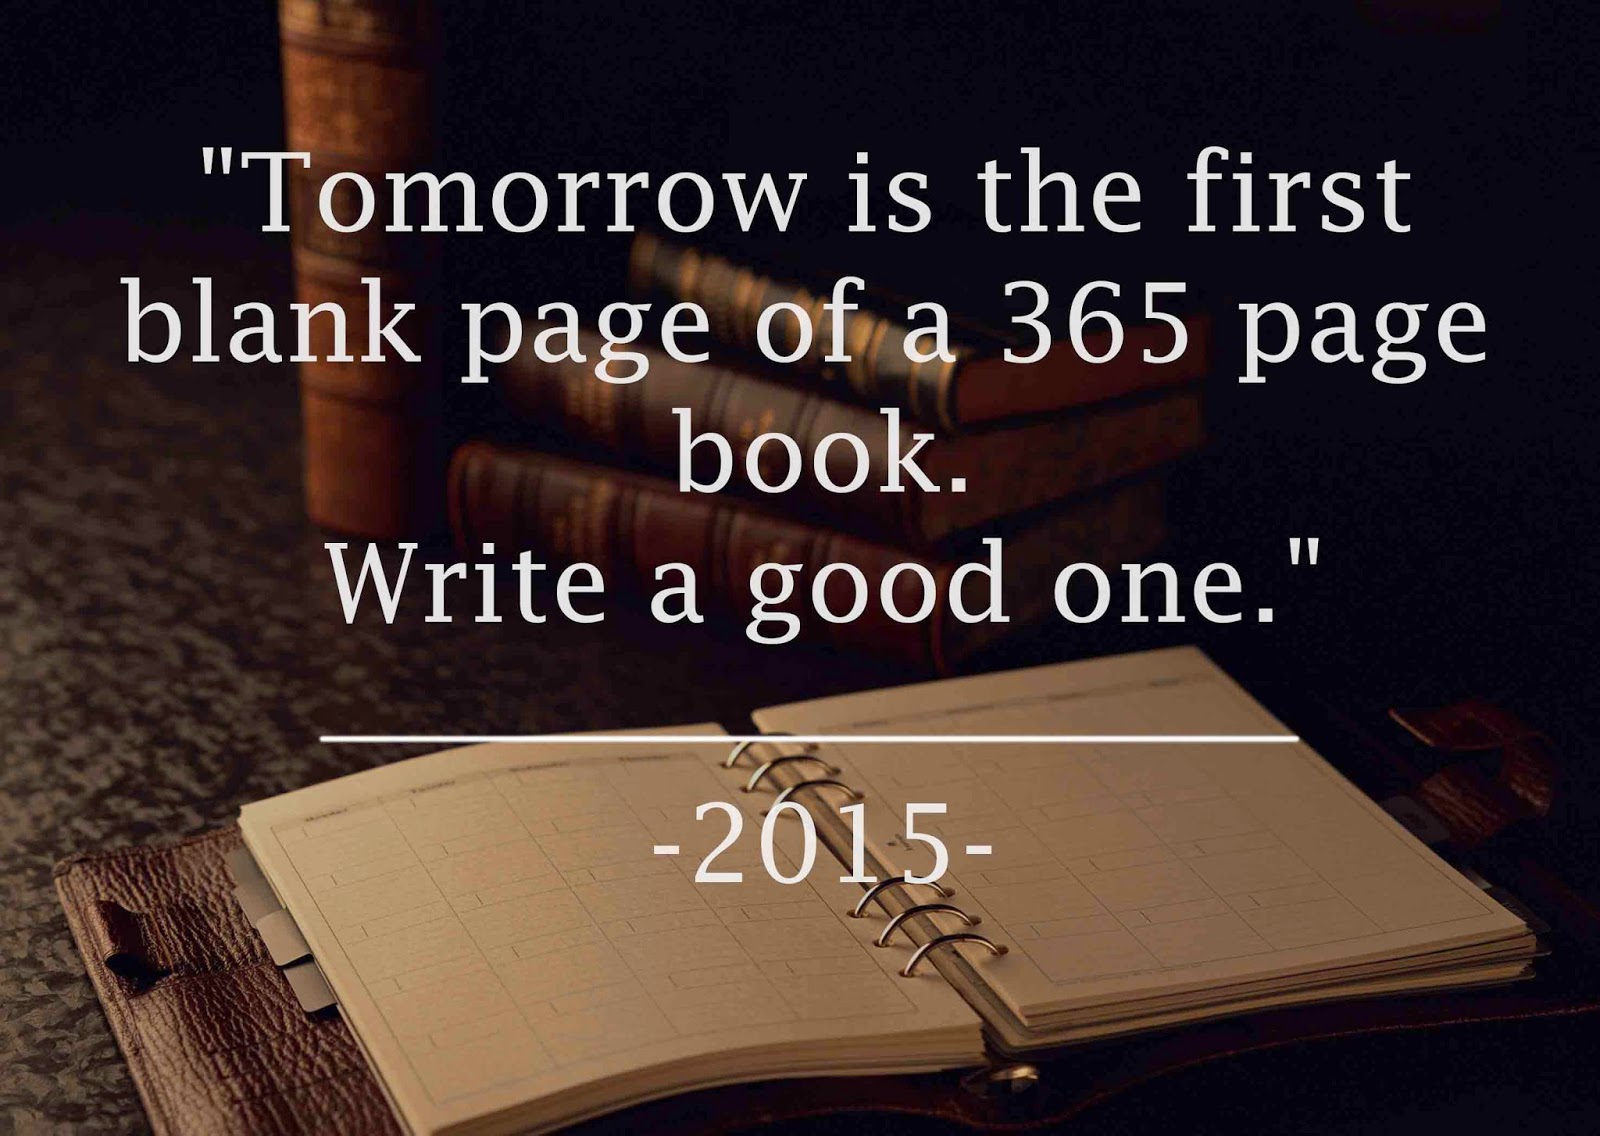 2015 new year, new chapter books, first blank page, new year's resolutions